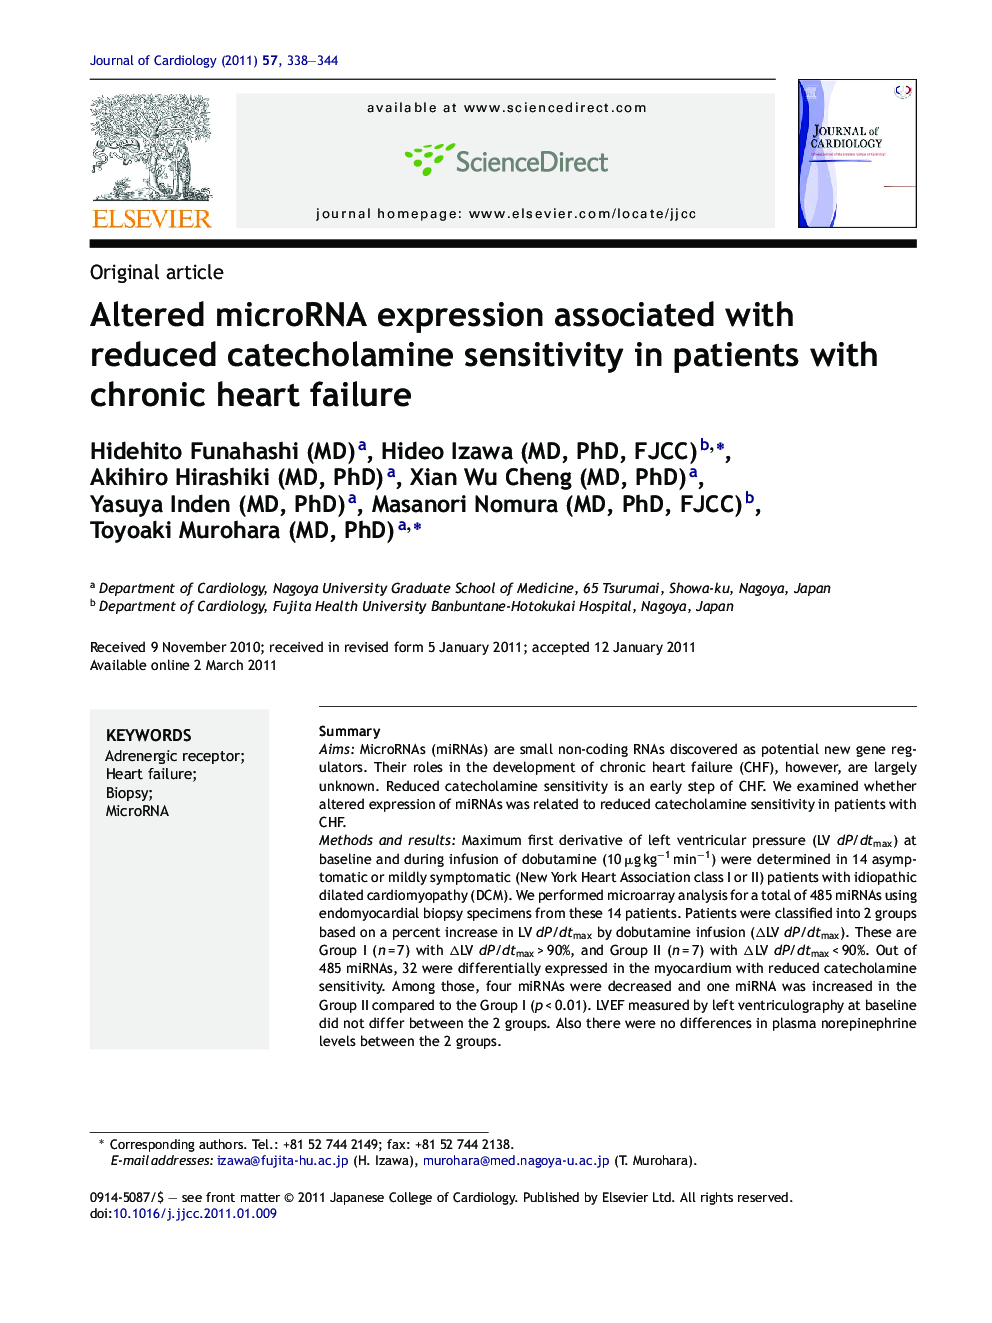 Altered microRNA expression associated with reduced catecholamine sensitivity in patients with chronic heart failure